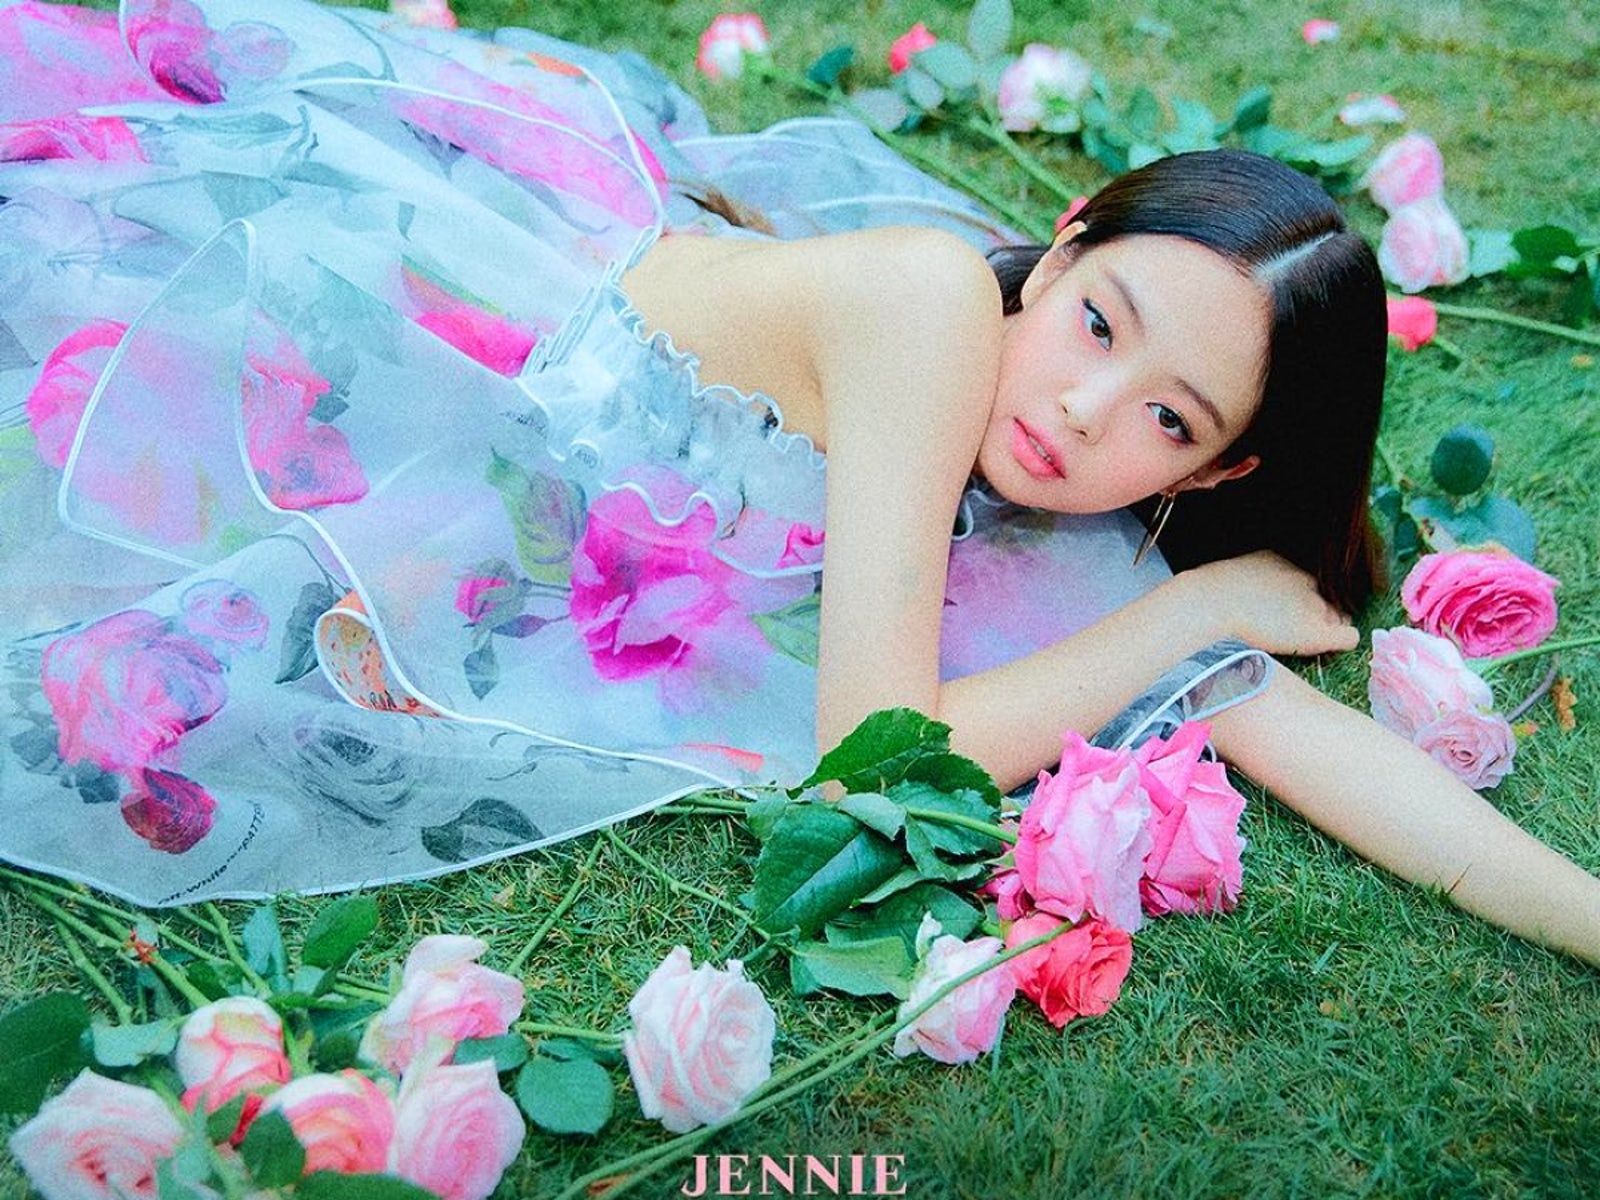 Black Pink singer Jennie shares new solo posters